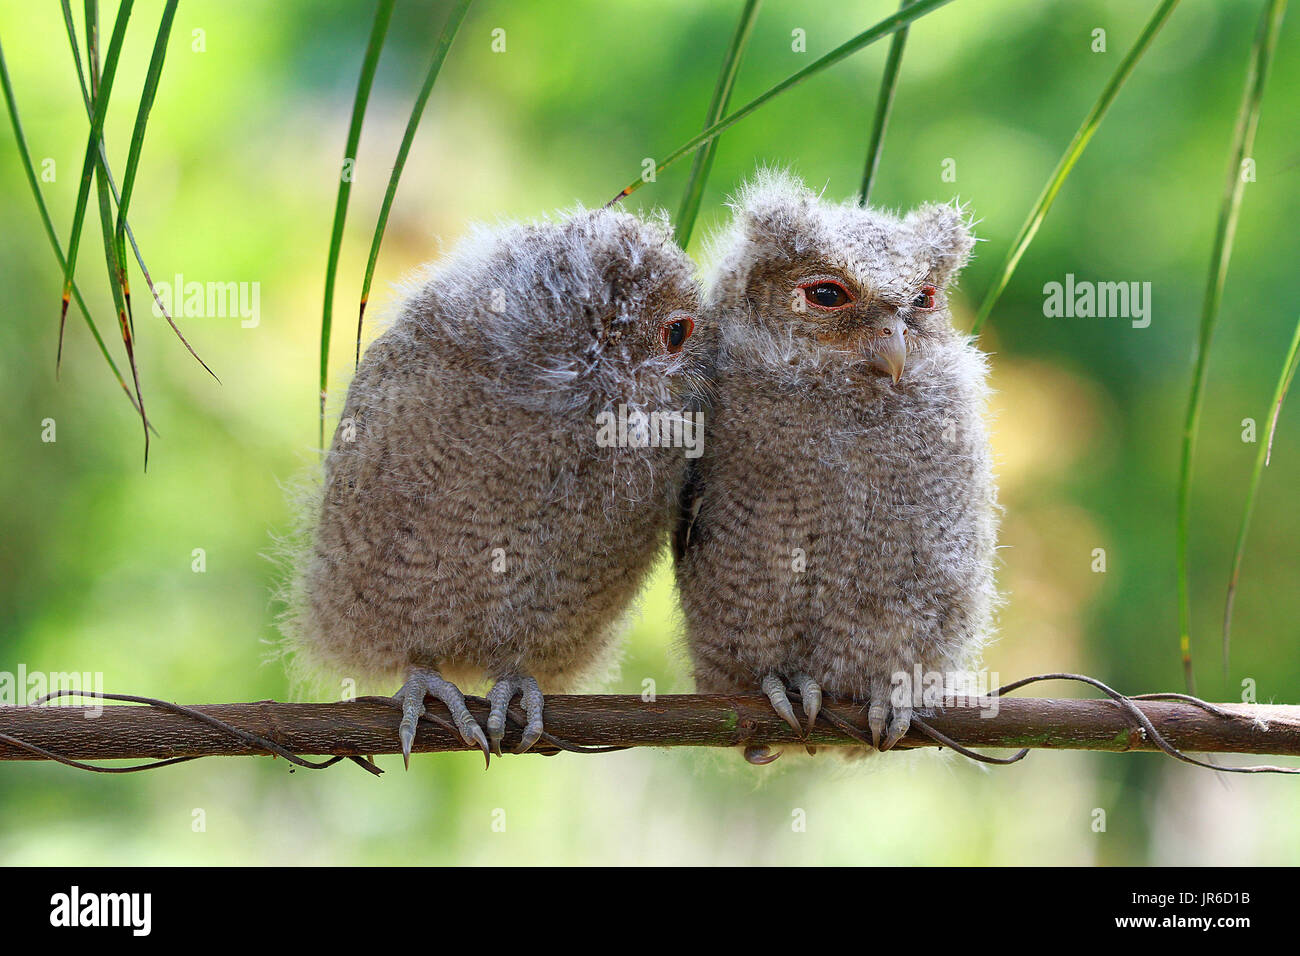 Two baby owls sitting on a branch, Indonesia Stock Photo - Alamy